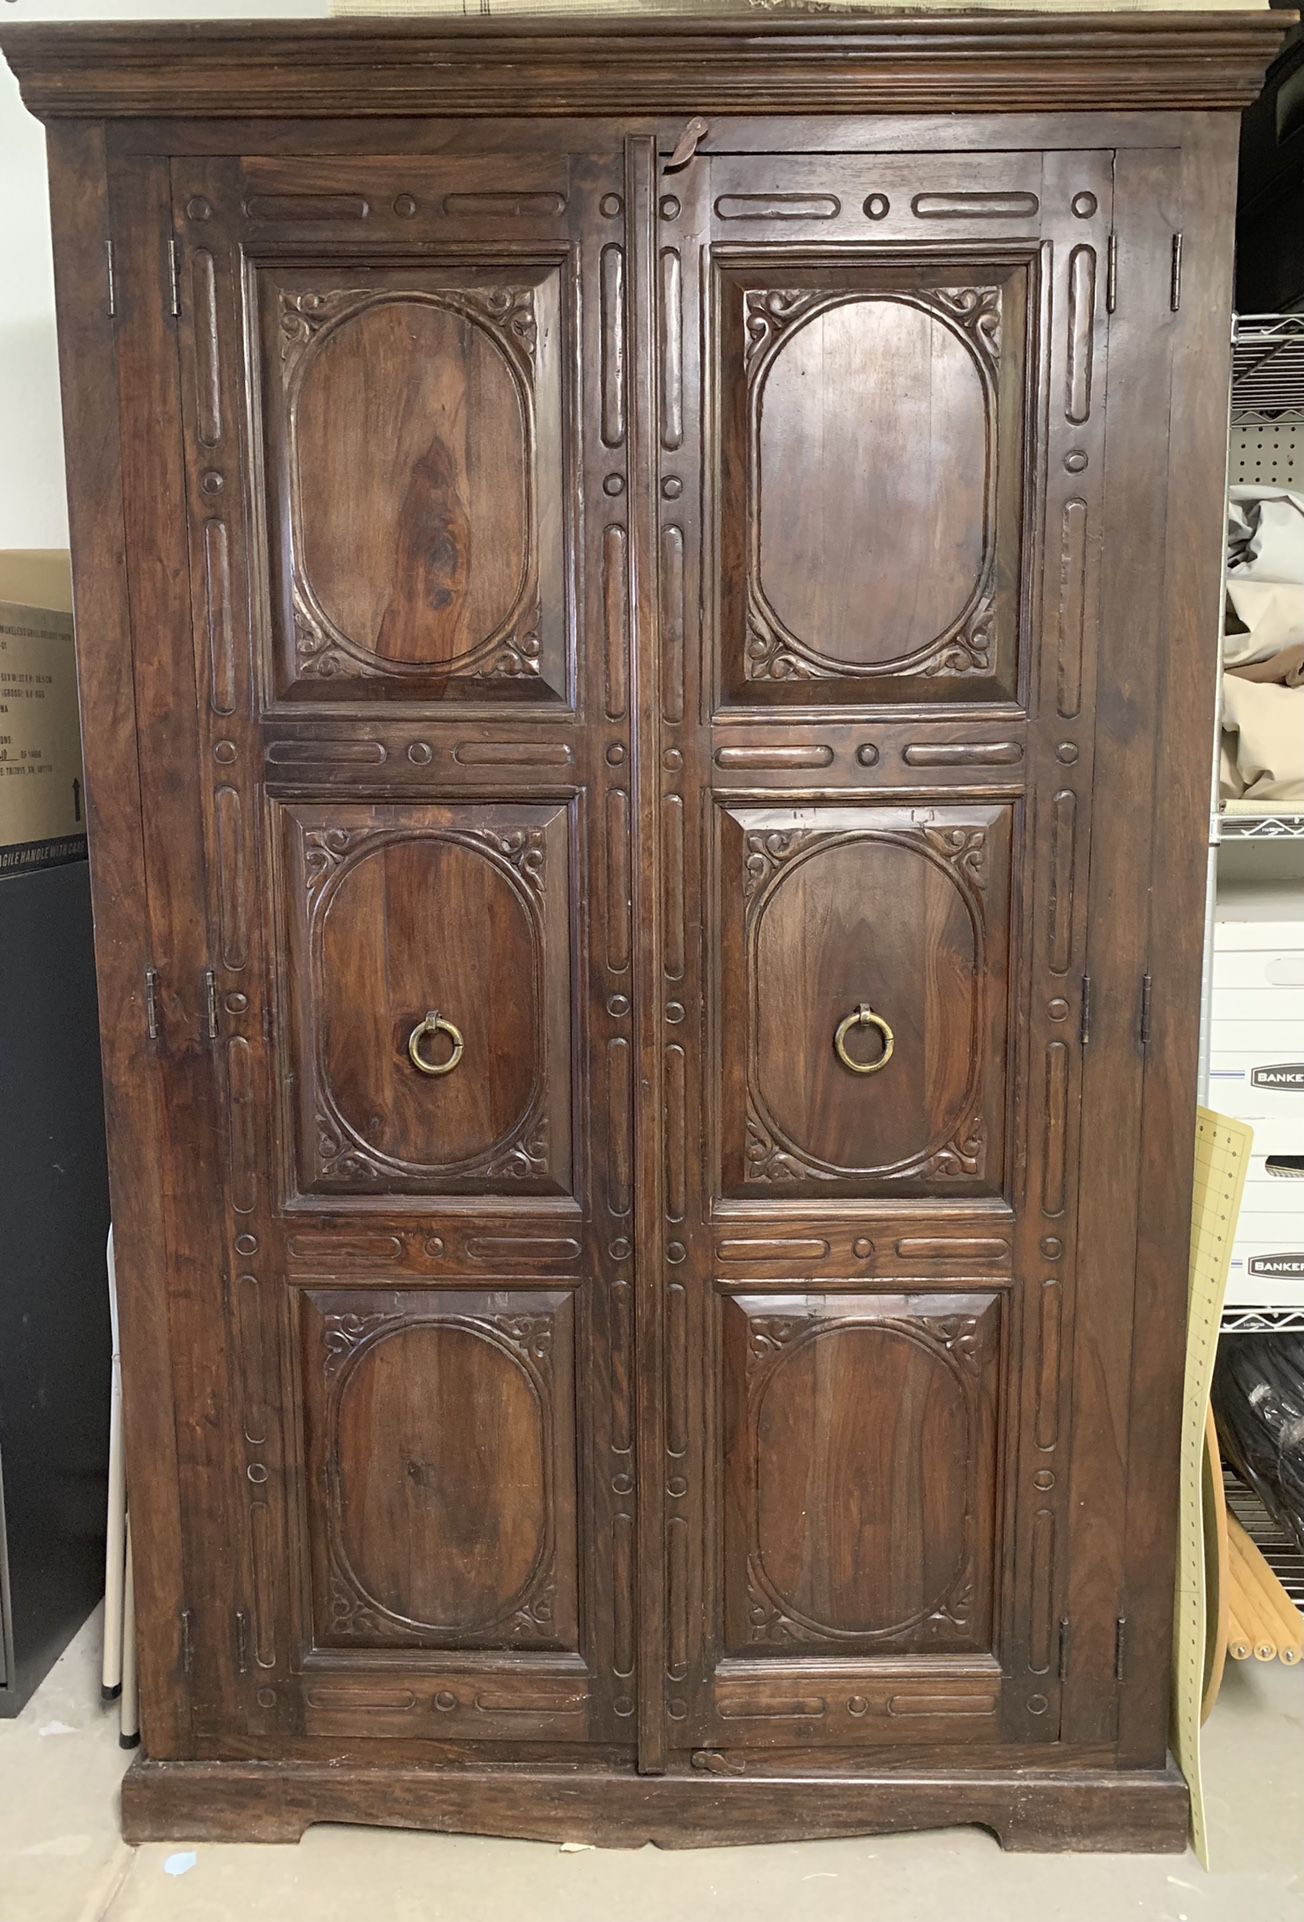 BEAUTIFULLY Crafted Rustic Wood Storage Cabinet  (Original Price $2,999)